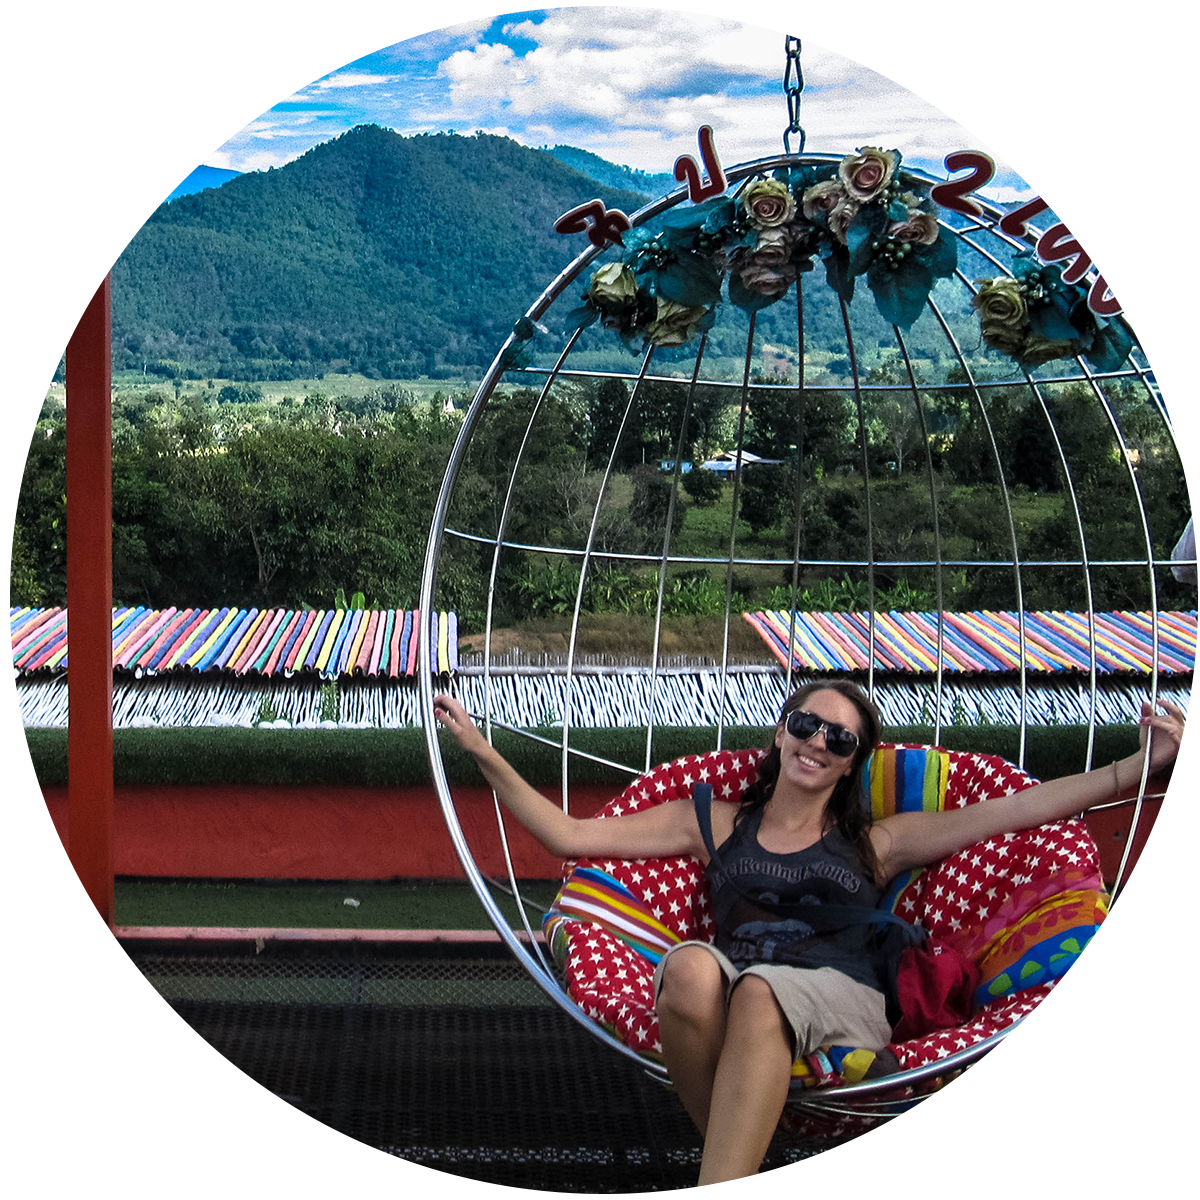 Kristin sits in a hammock seat and smiles, with a lush green mountain range in the background.